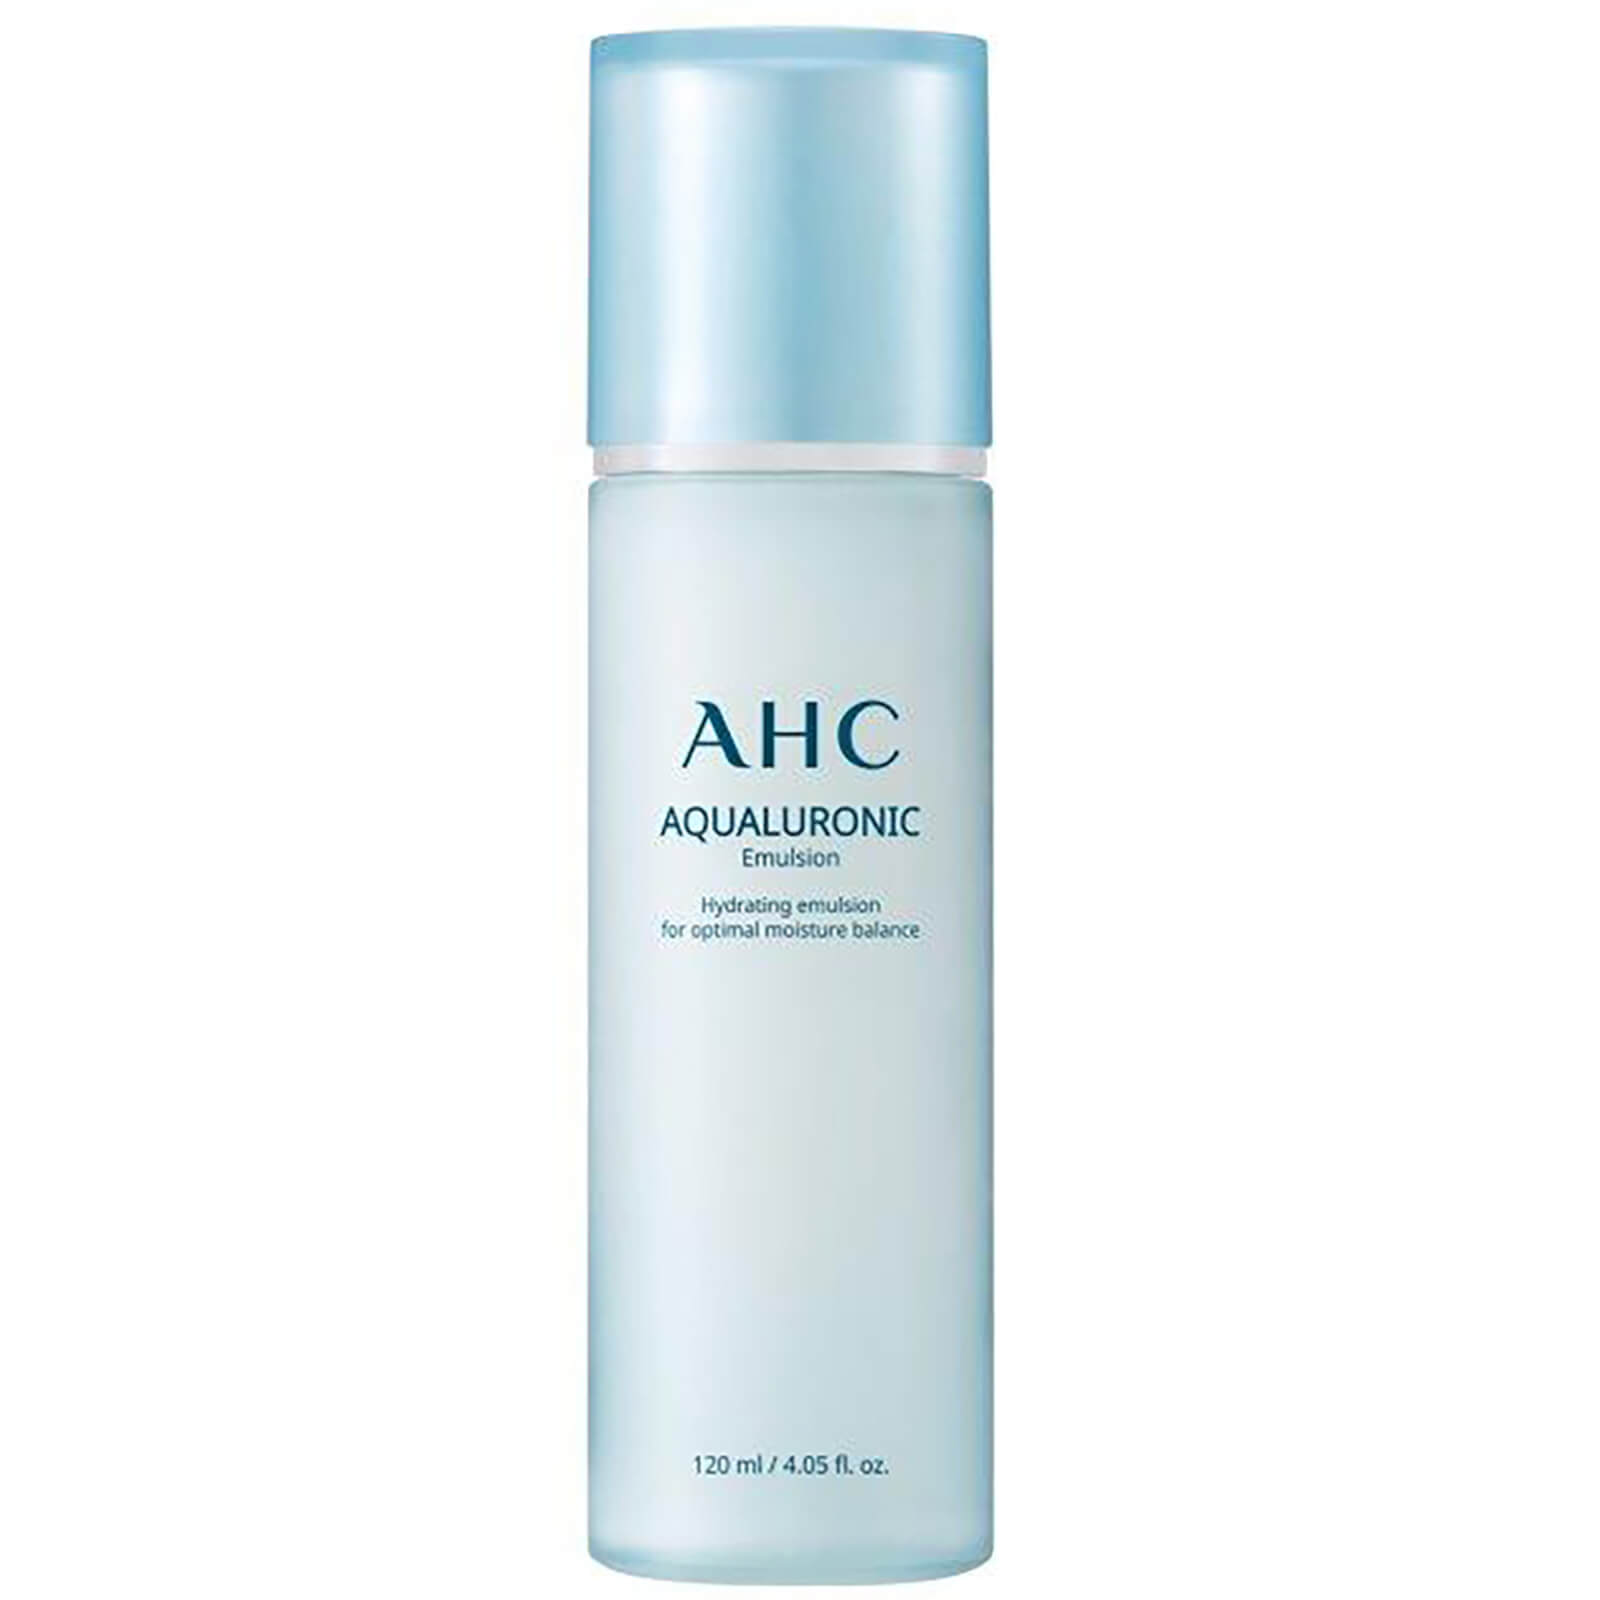 AHC HYDRATING AQUALURONIC EMULSION FACE LOTION 120ML,68308906